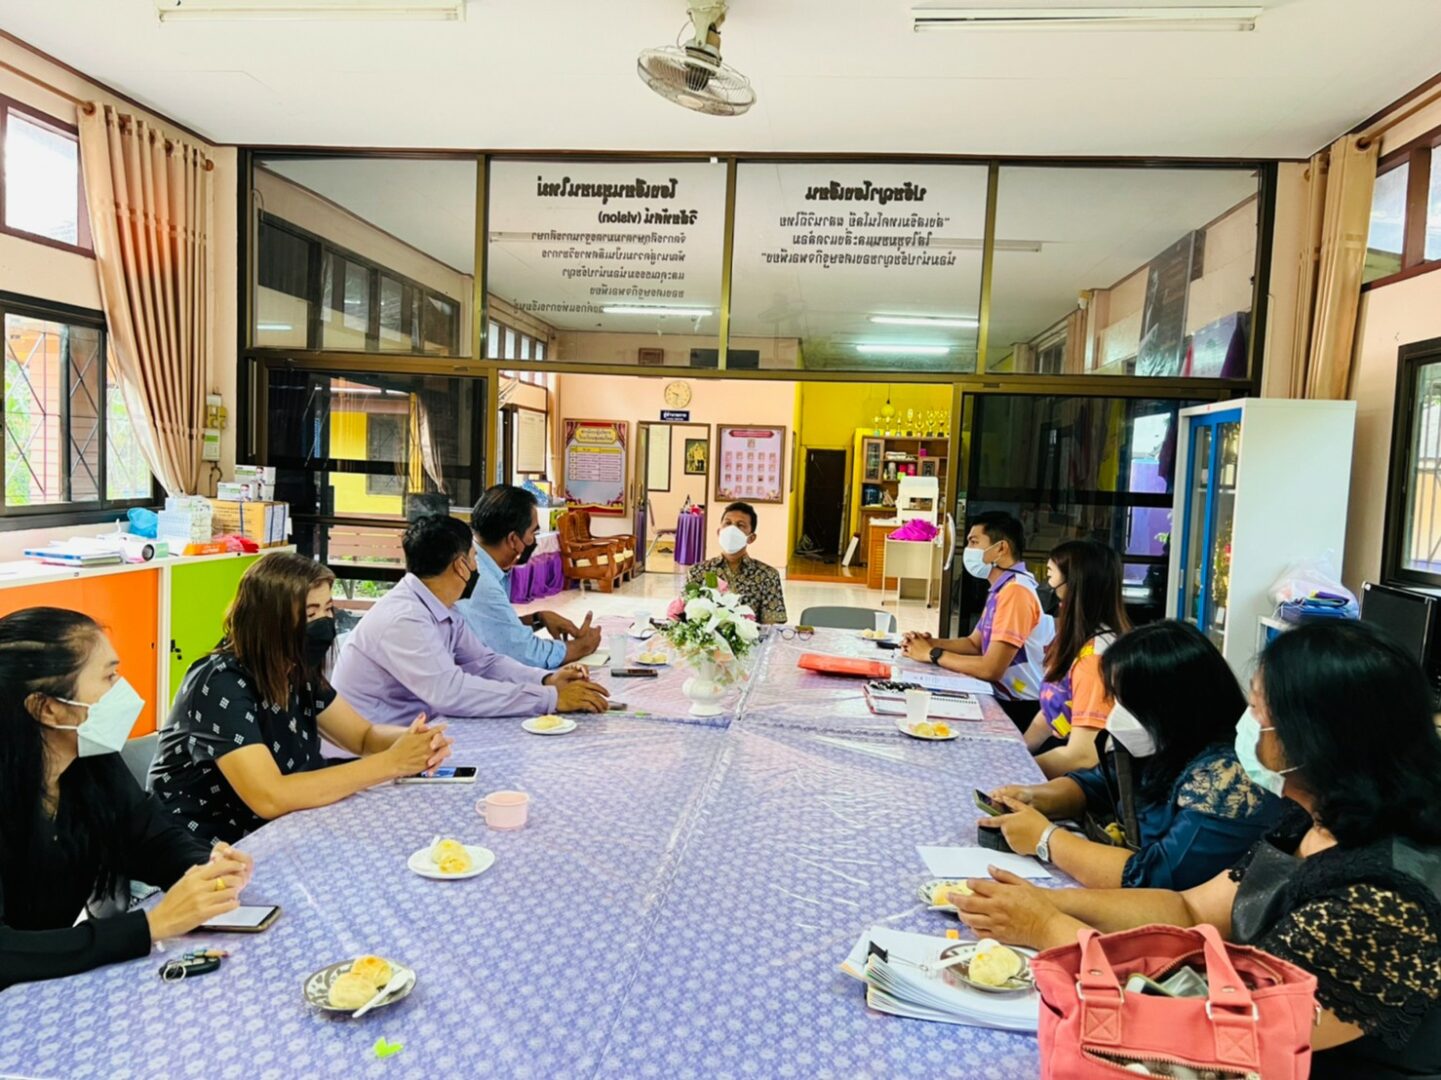 Walailak University joins forces with Chumchon Sathit Walailak Phatthana Tambon Health Promotion Hospital to develop integrated health service delivery networks for elderly